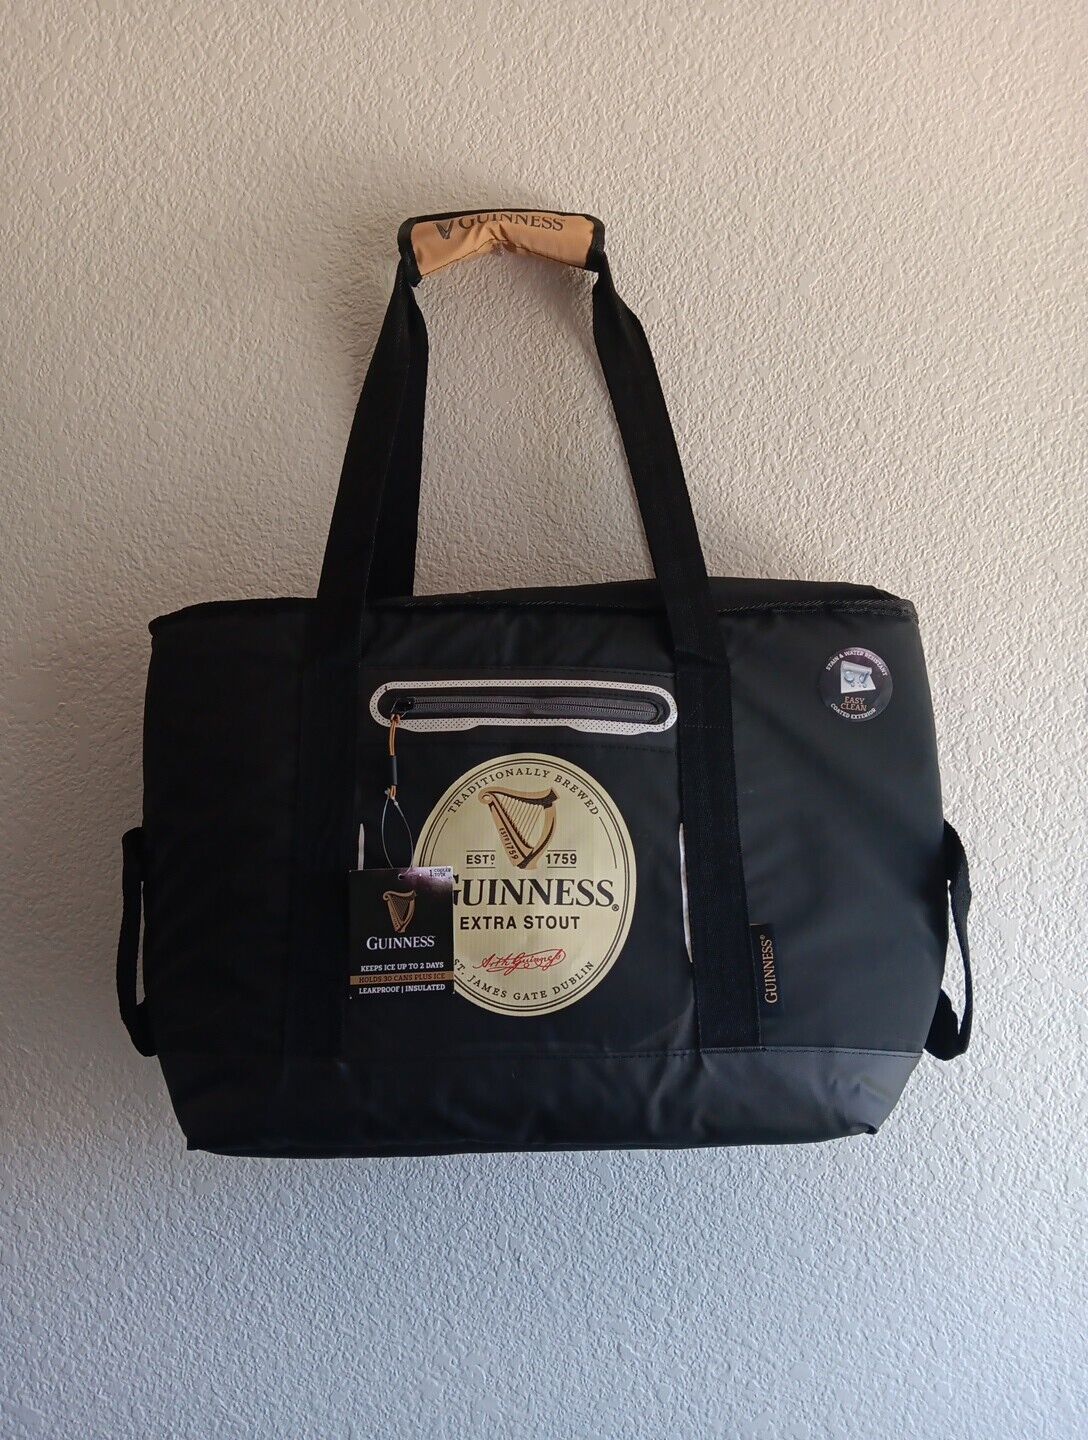 (New) Guinness 30 Can Black Cooler Tote